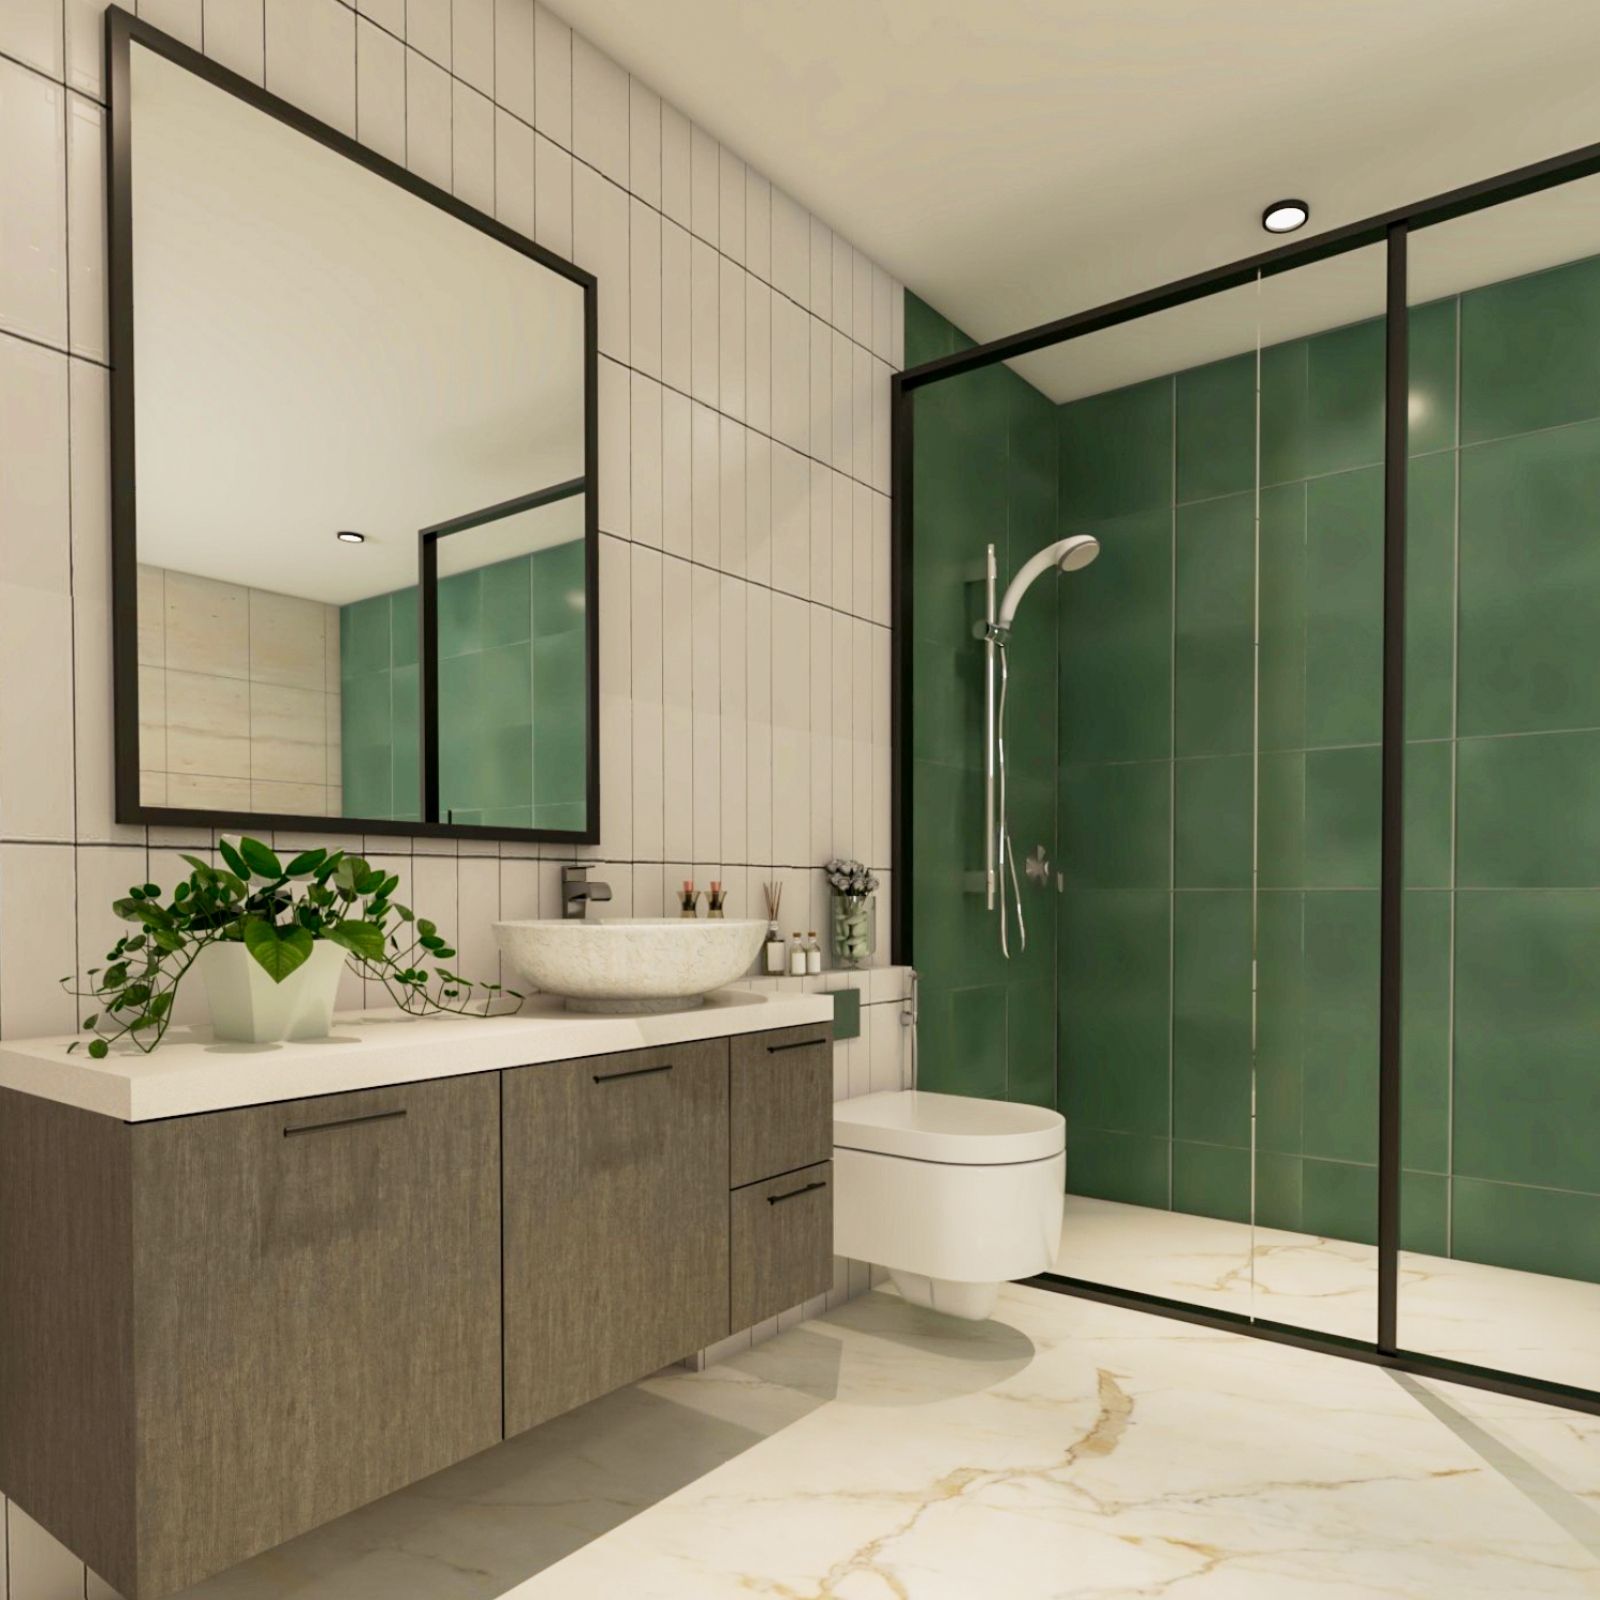 Modern Green And White Small Bathroom Design With Marble Flooring